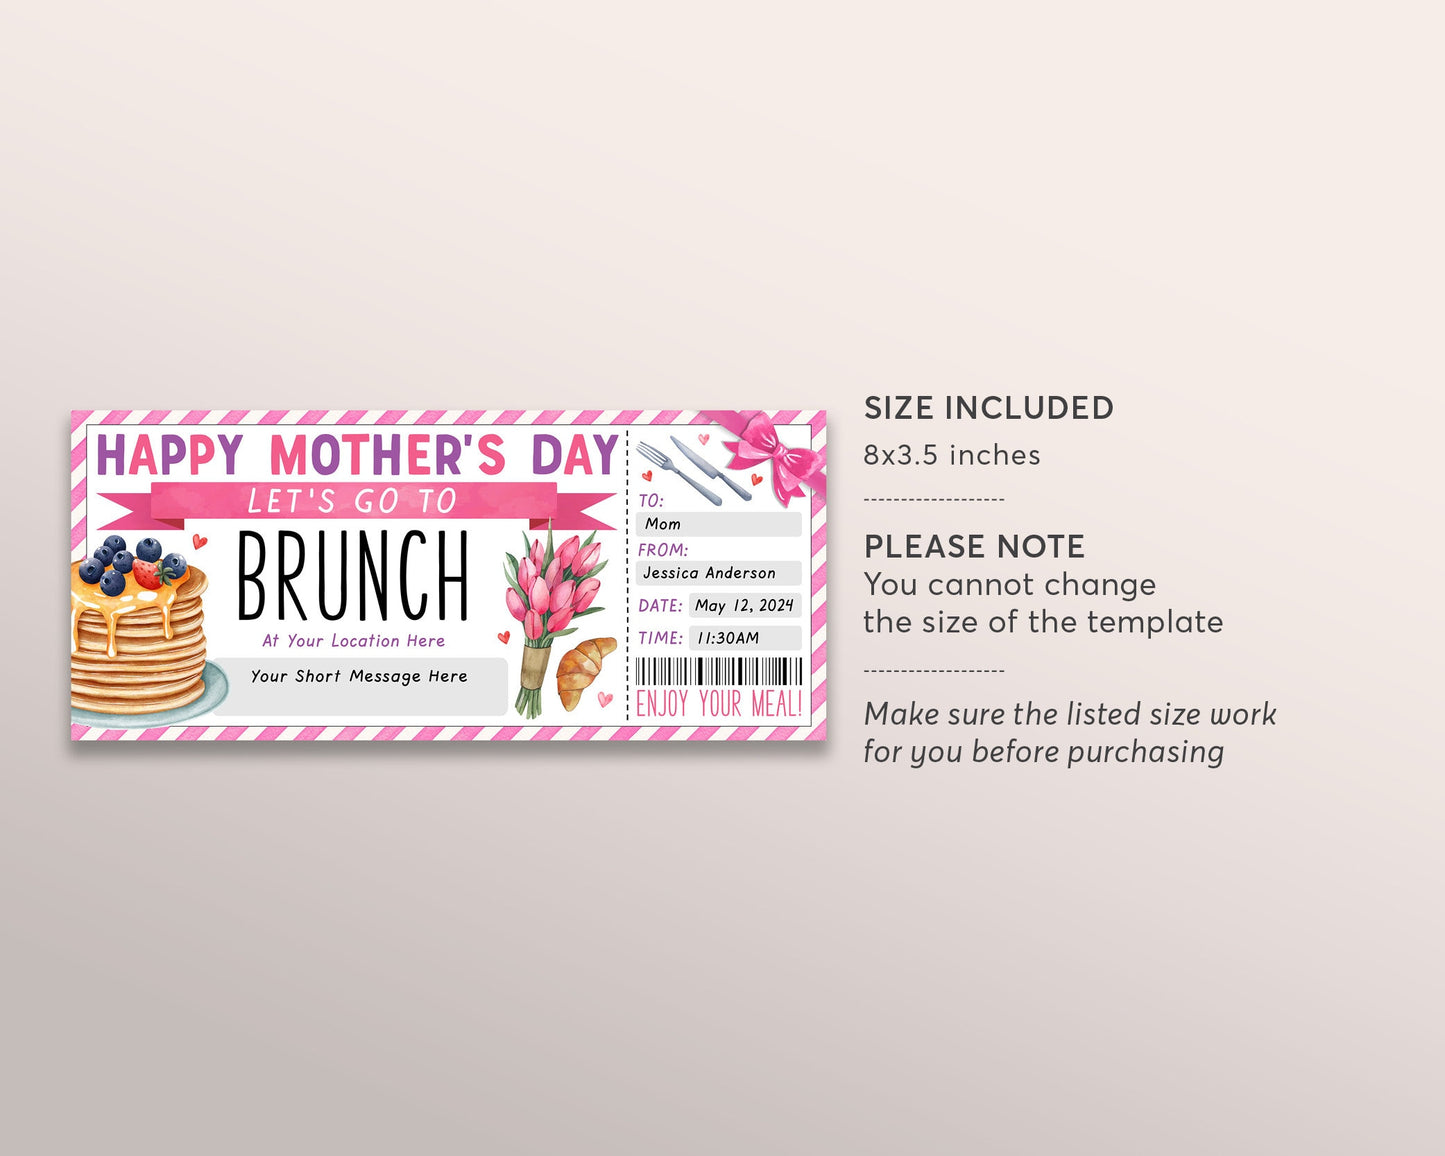 Mothers Day Brunch Coupon Ticket Editable Template, Mothers Day Lunch Luncheon Gift Certificate For Mom, Breakfast Gift Voucher Printable